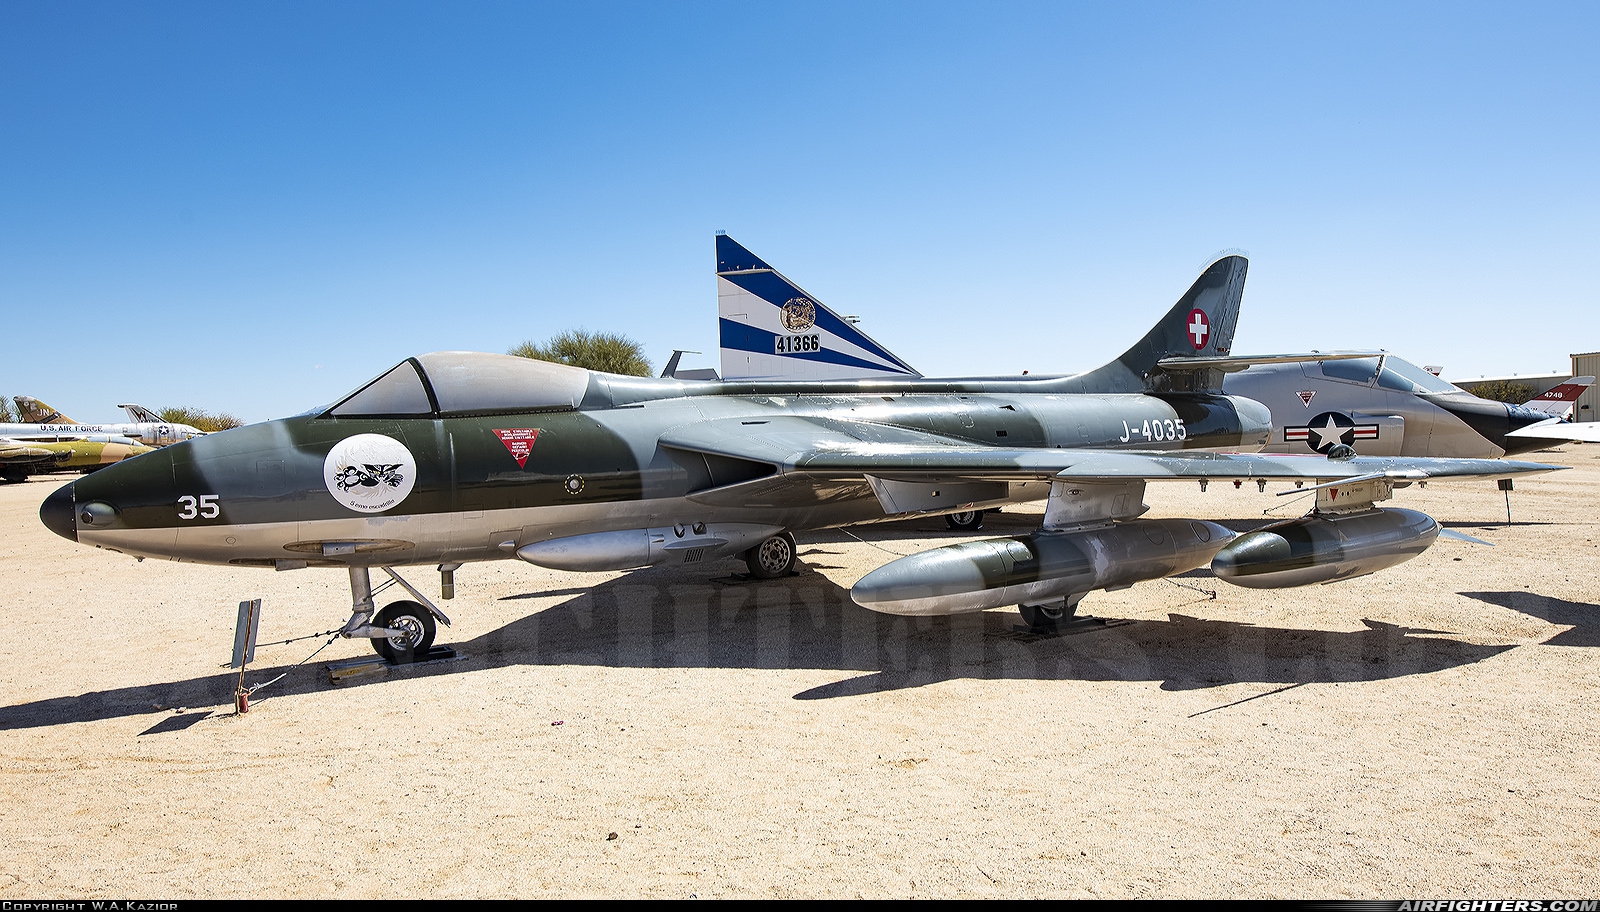 Switzerland - Air Force Hawker Hunter F58 J-4035 at Tucson - Pima Air and Space Museum, USA